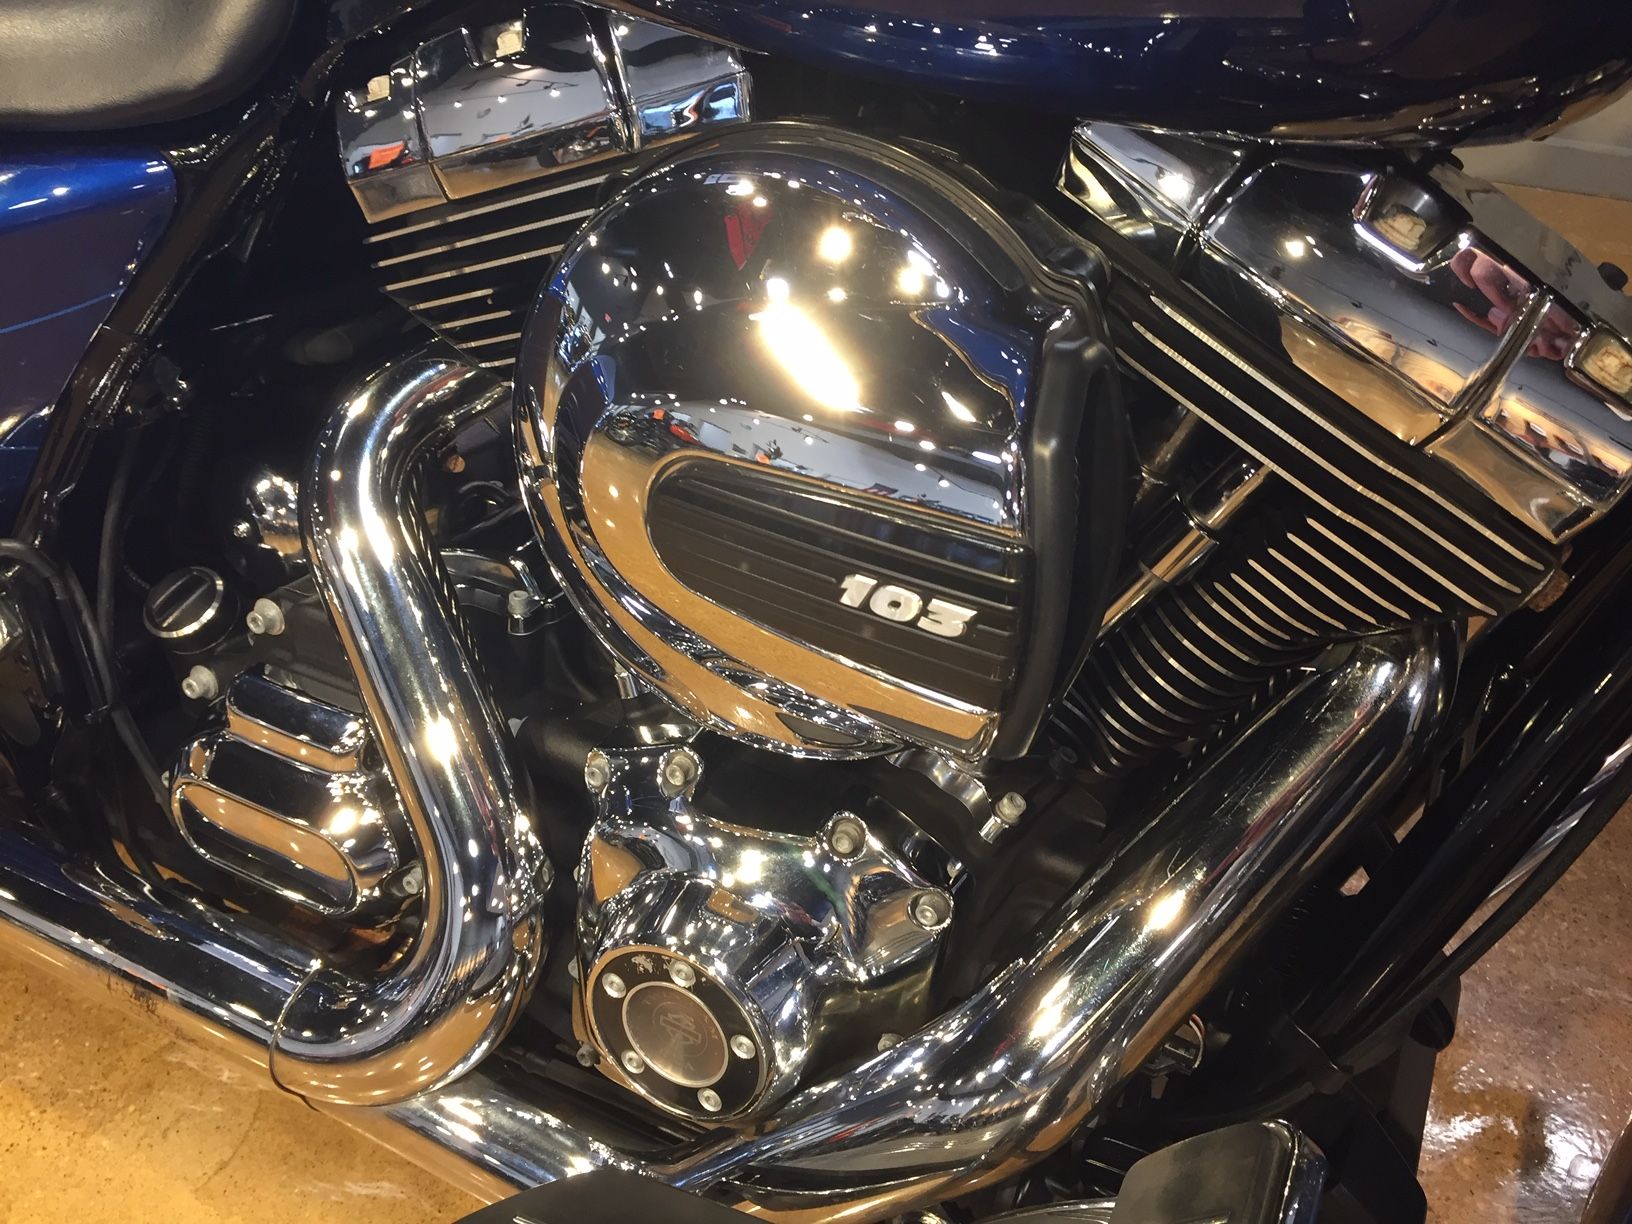 2015 Harley-Davidson ROAD GLIDE SPECIAL in West Long Branch, New Jersey - Photo 11